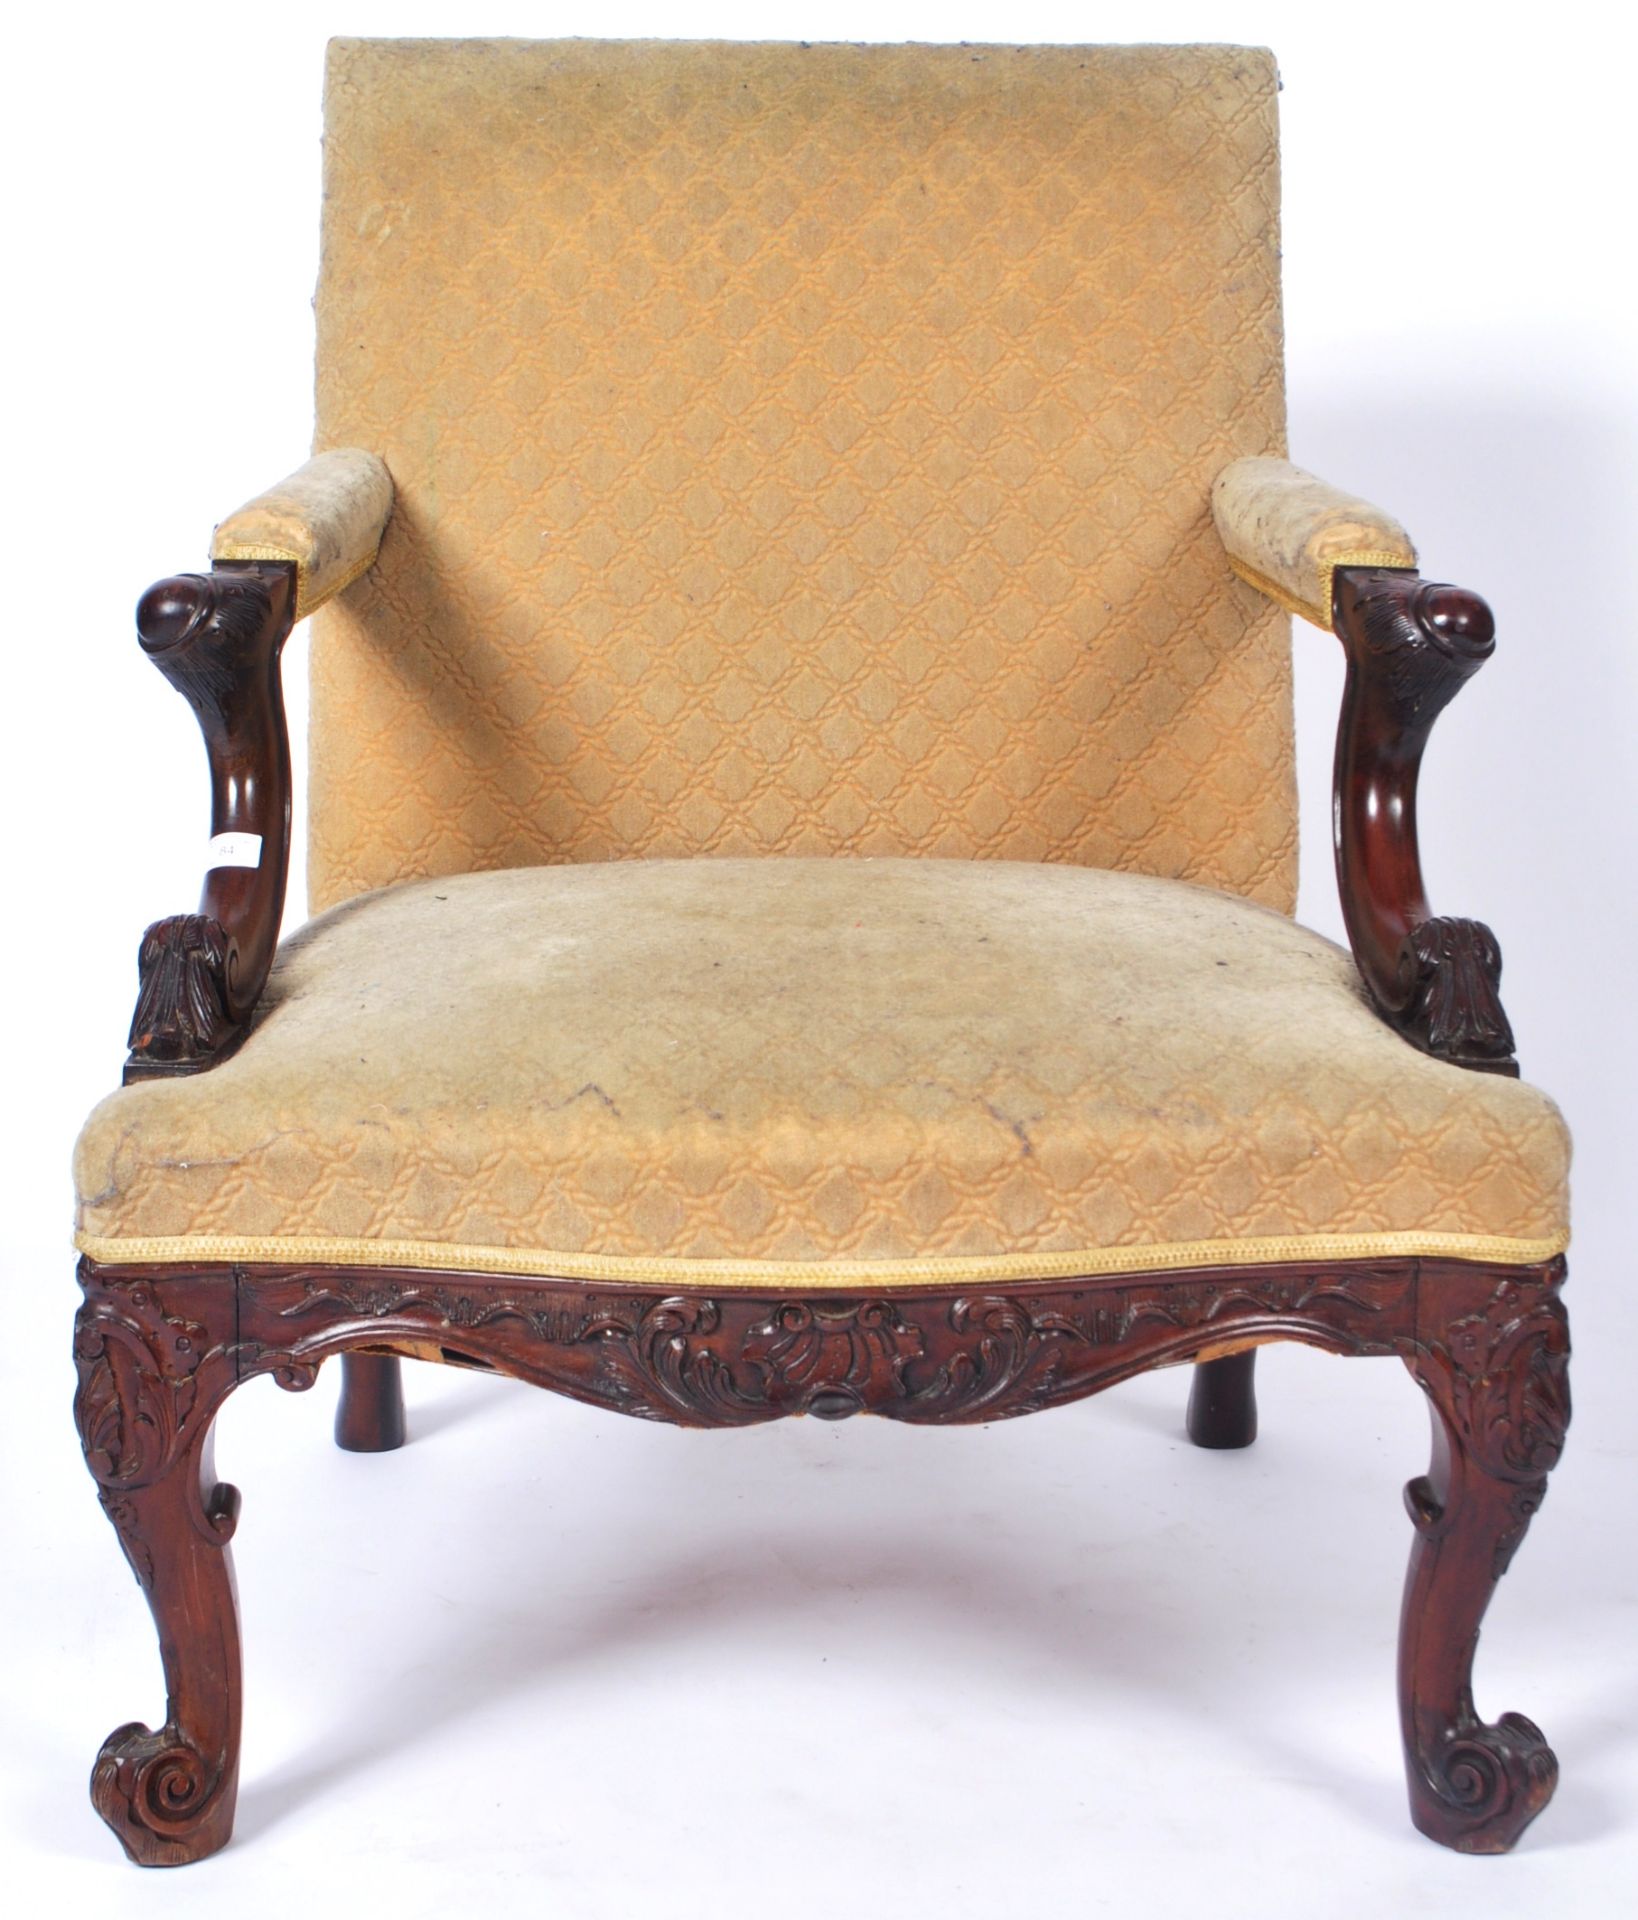 19TH CENTURY CARVED GAINSBOROUGH ARMCHAIR - Image 5 of 8